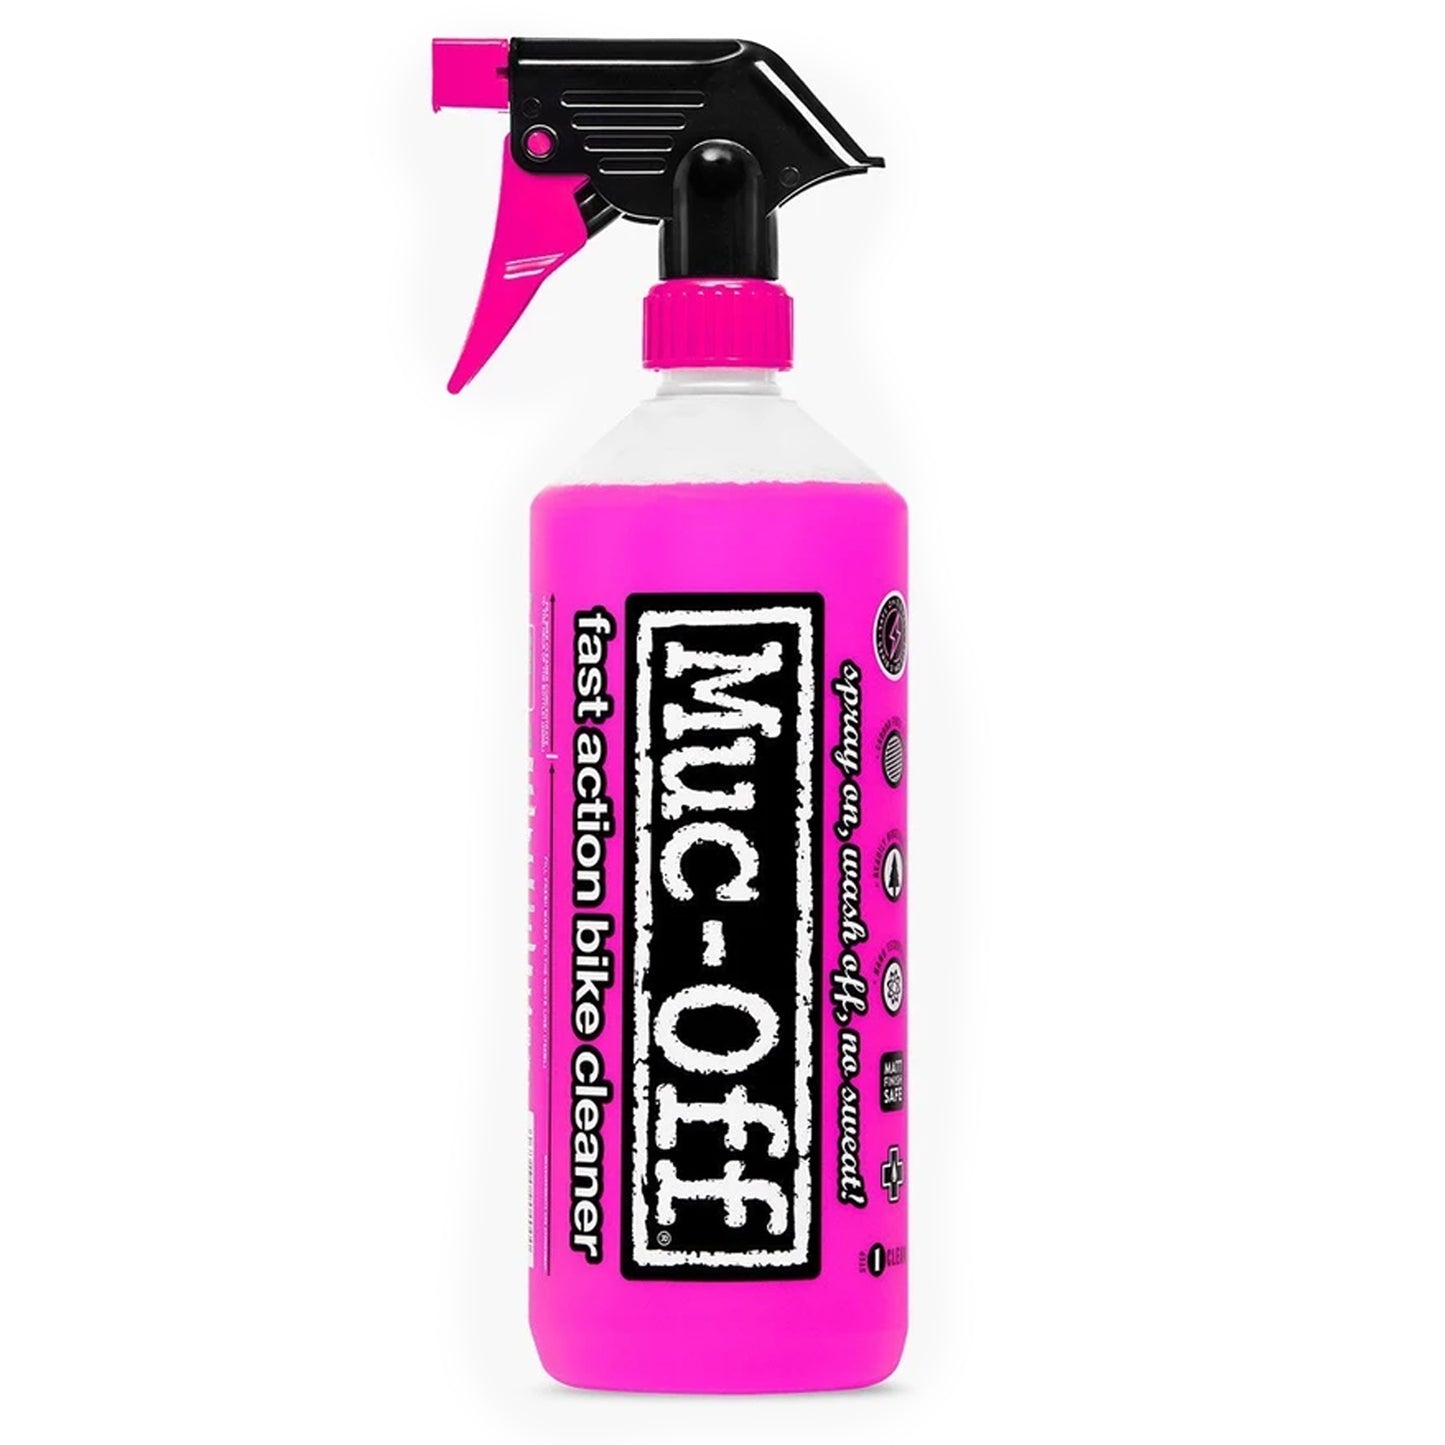 Muc-Off 8-In-1 Bicycle Cleaning Kit